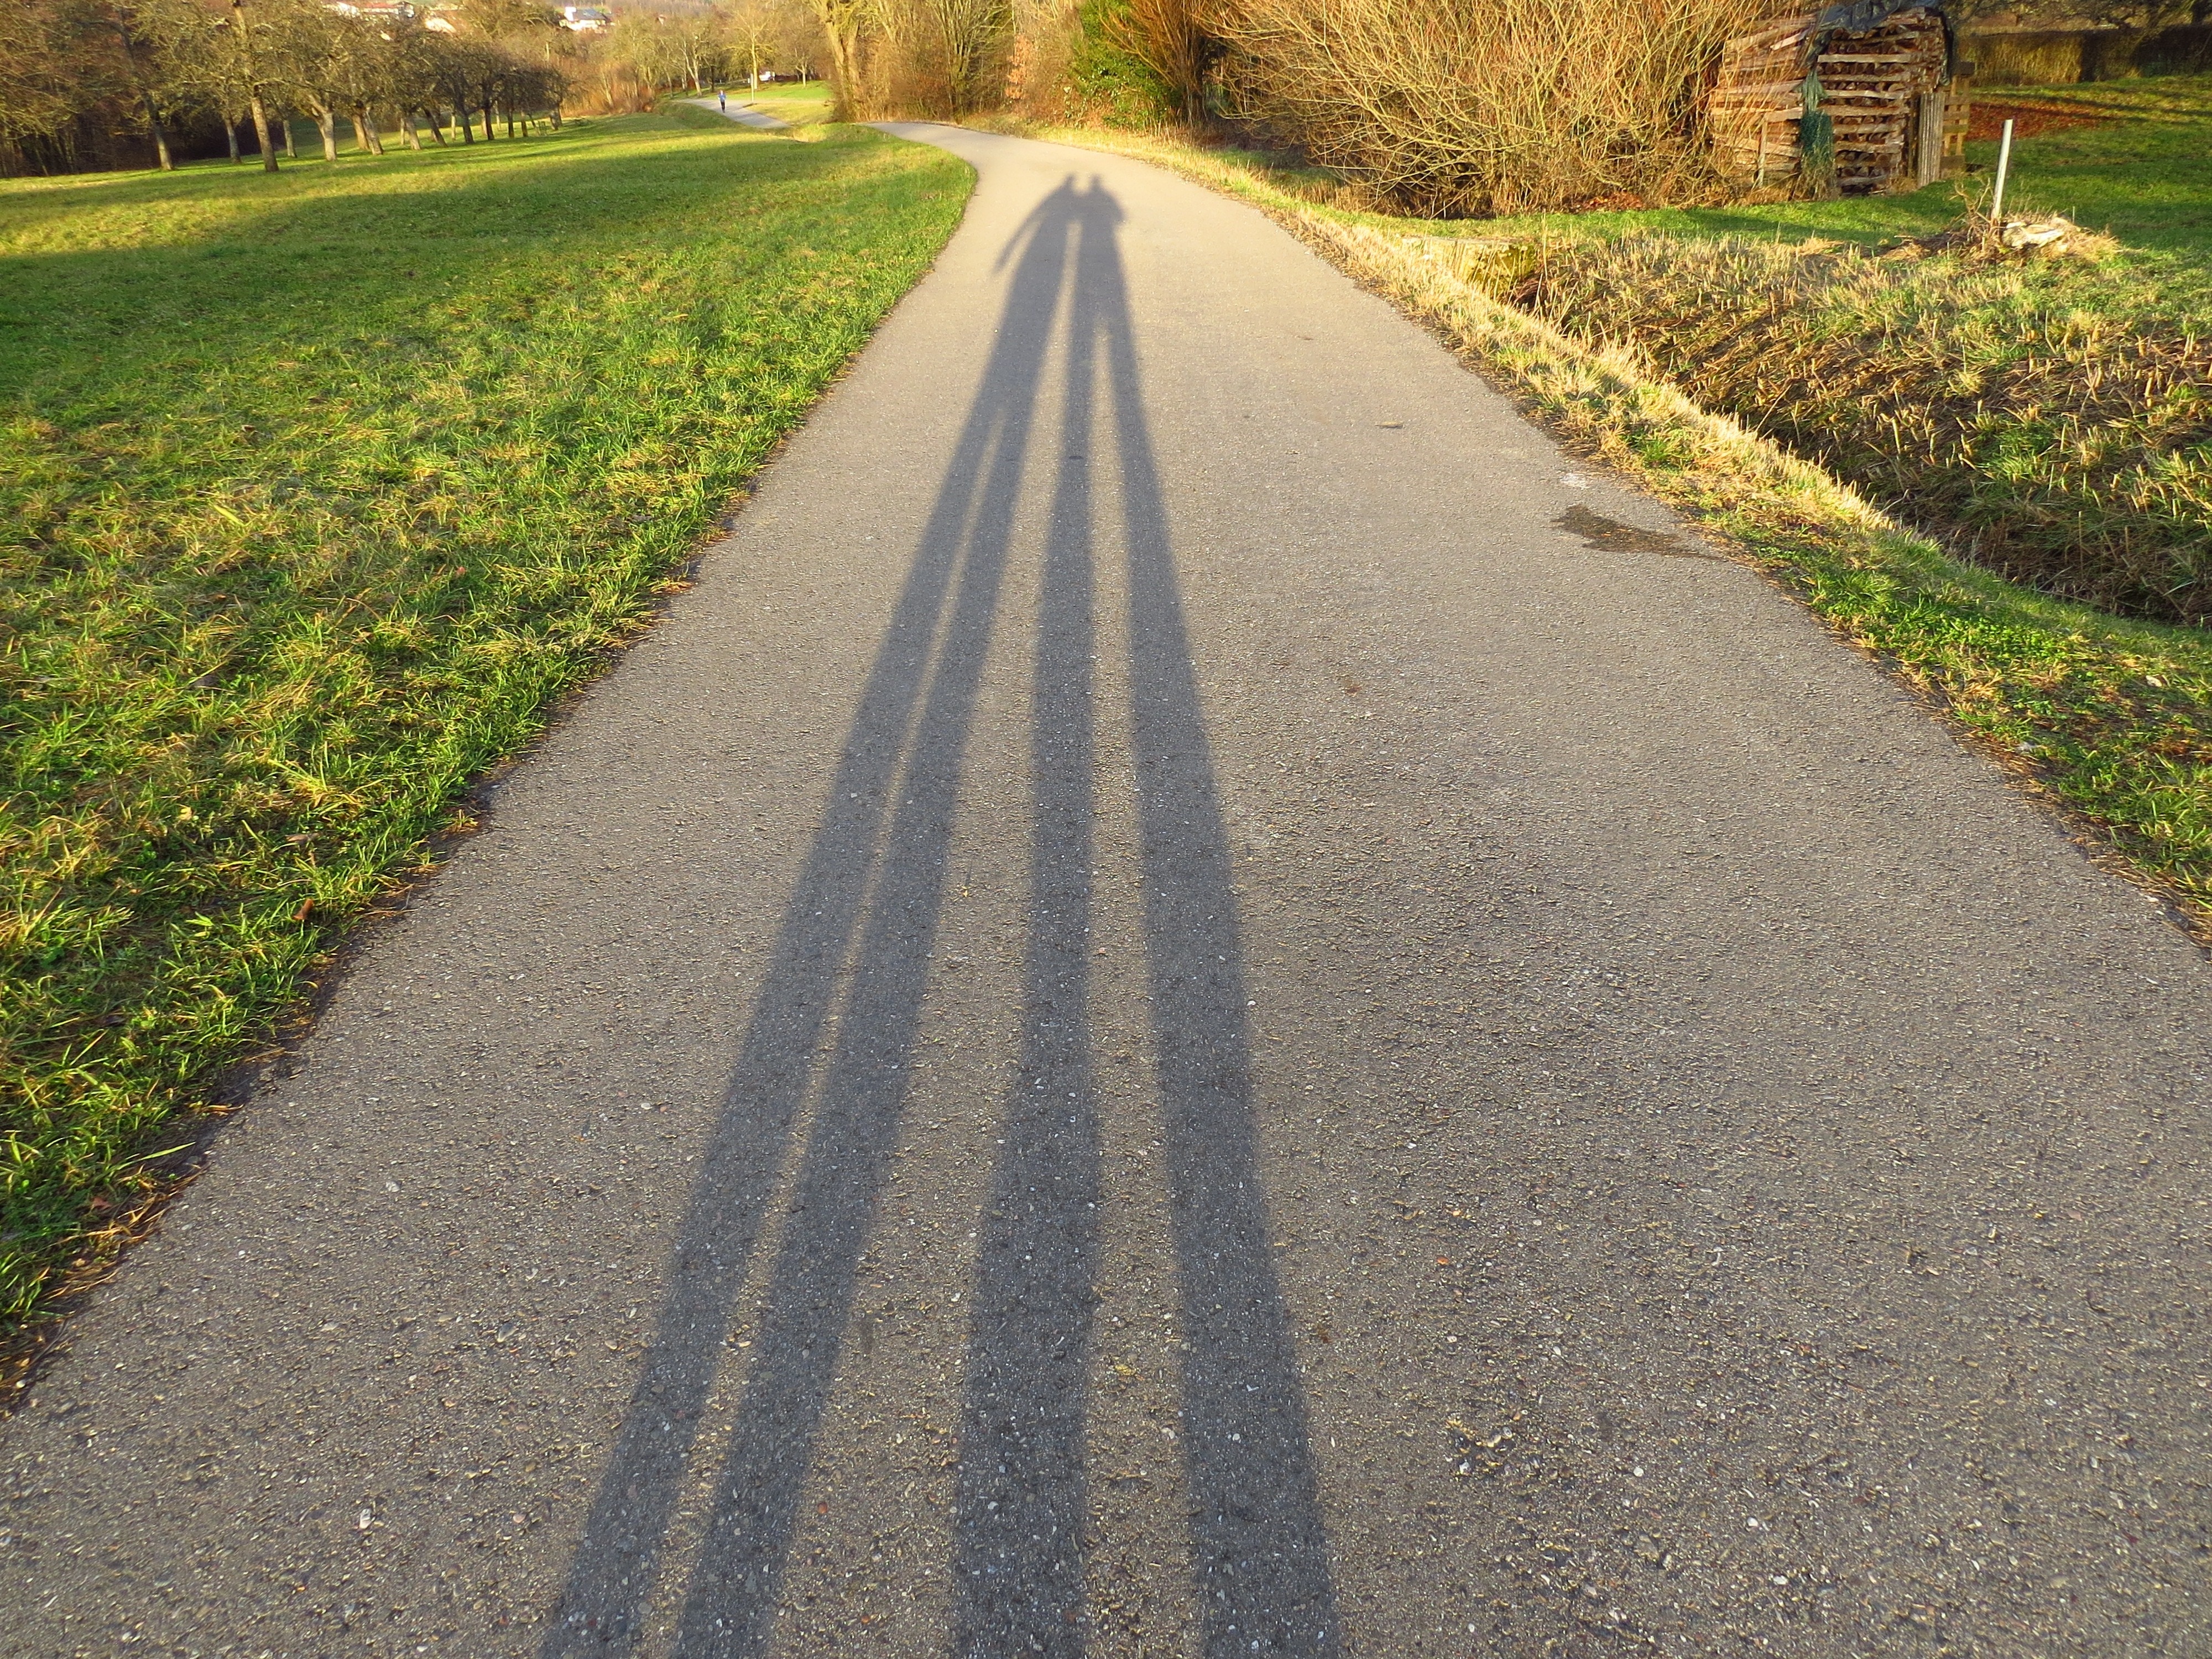 shadow of two person walking on gray road between green grasses during daytime